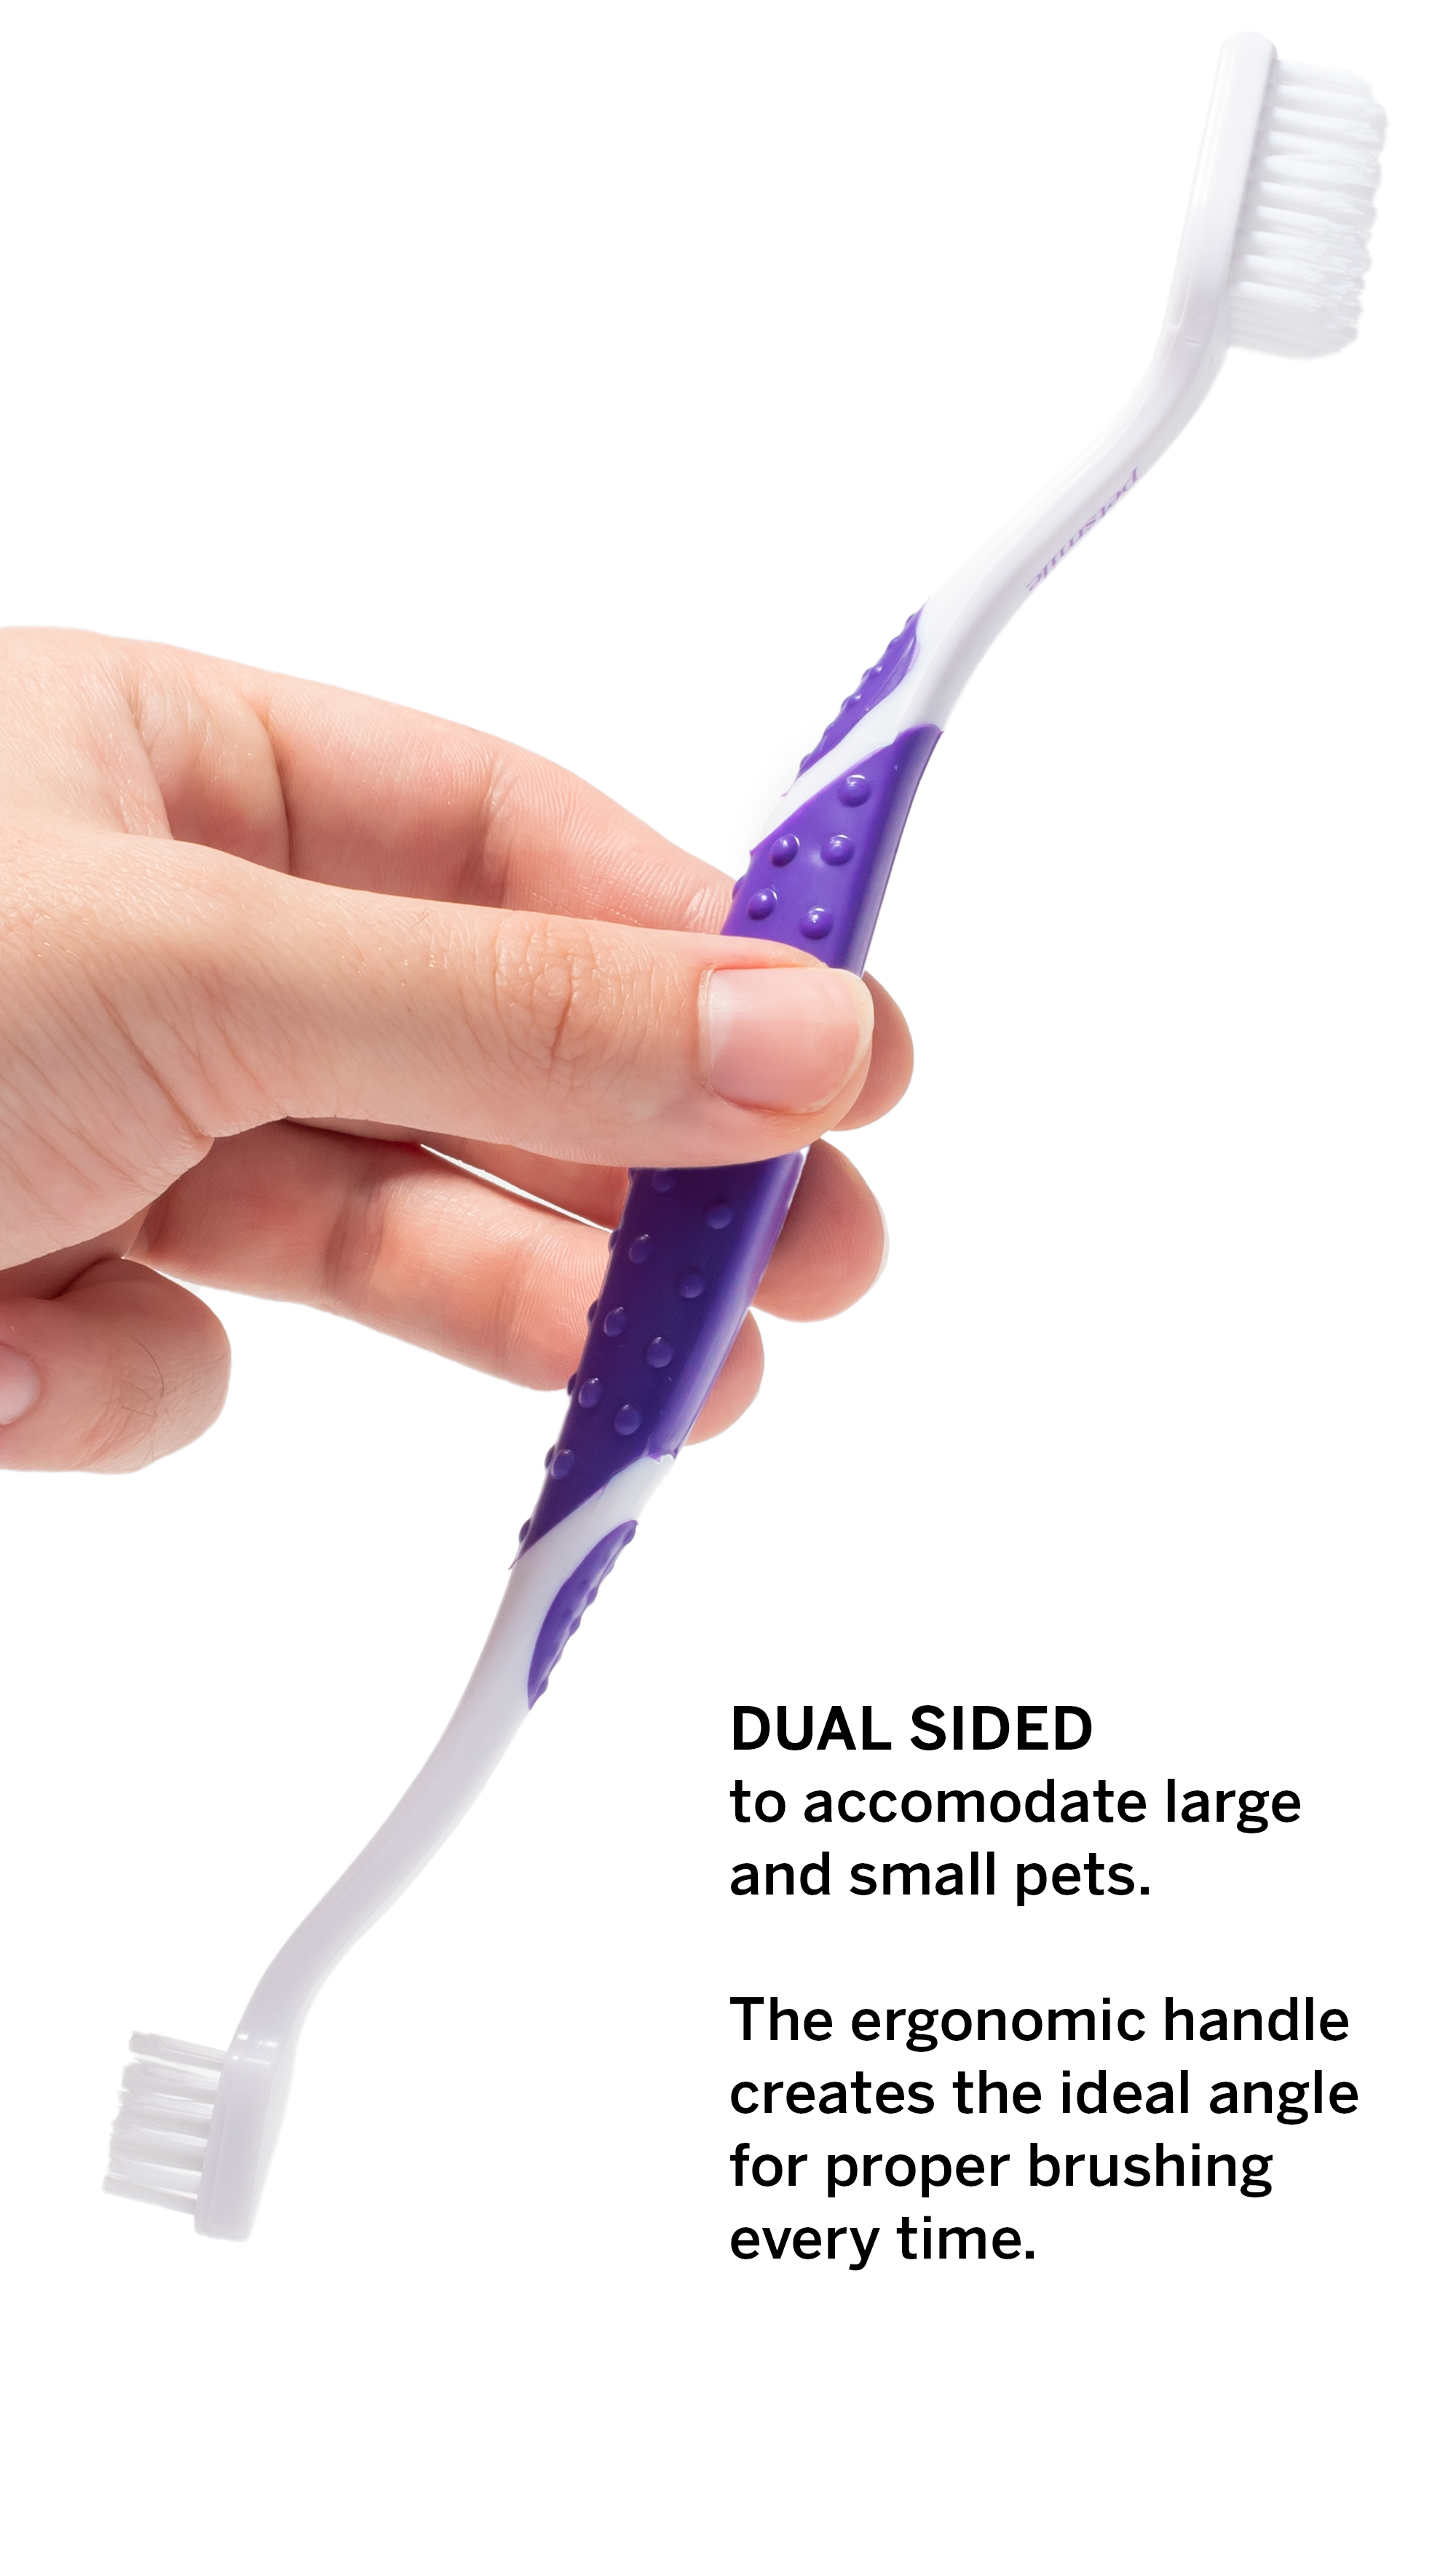 petsmile brush removes bacteria with ease , Dual-sided brush cleans teeth and gums , Purple toothbrush with 45-degree angle , Large toothpaste with London Broil flavor , Purple toothbrush that makes teeth cleaner